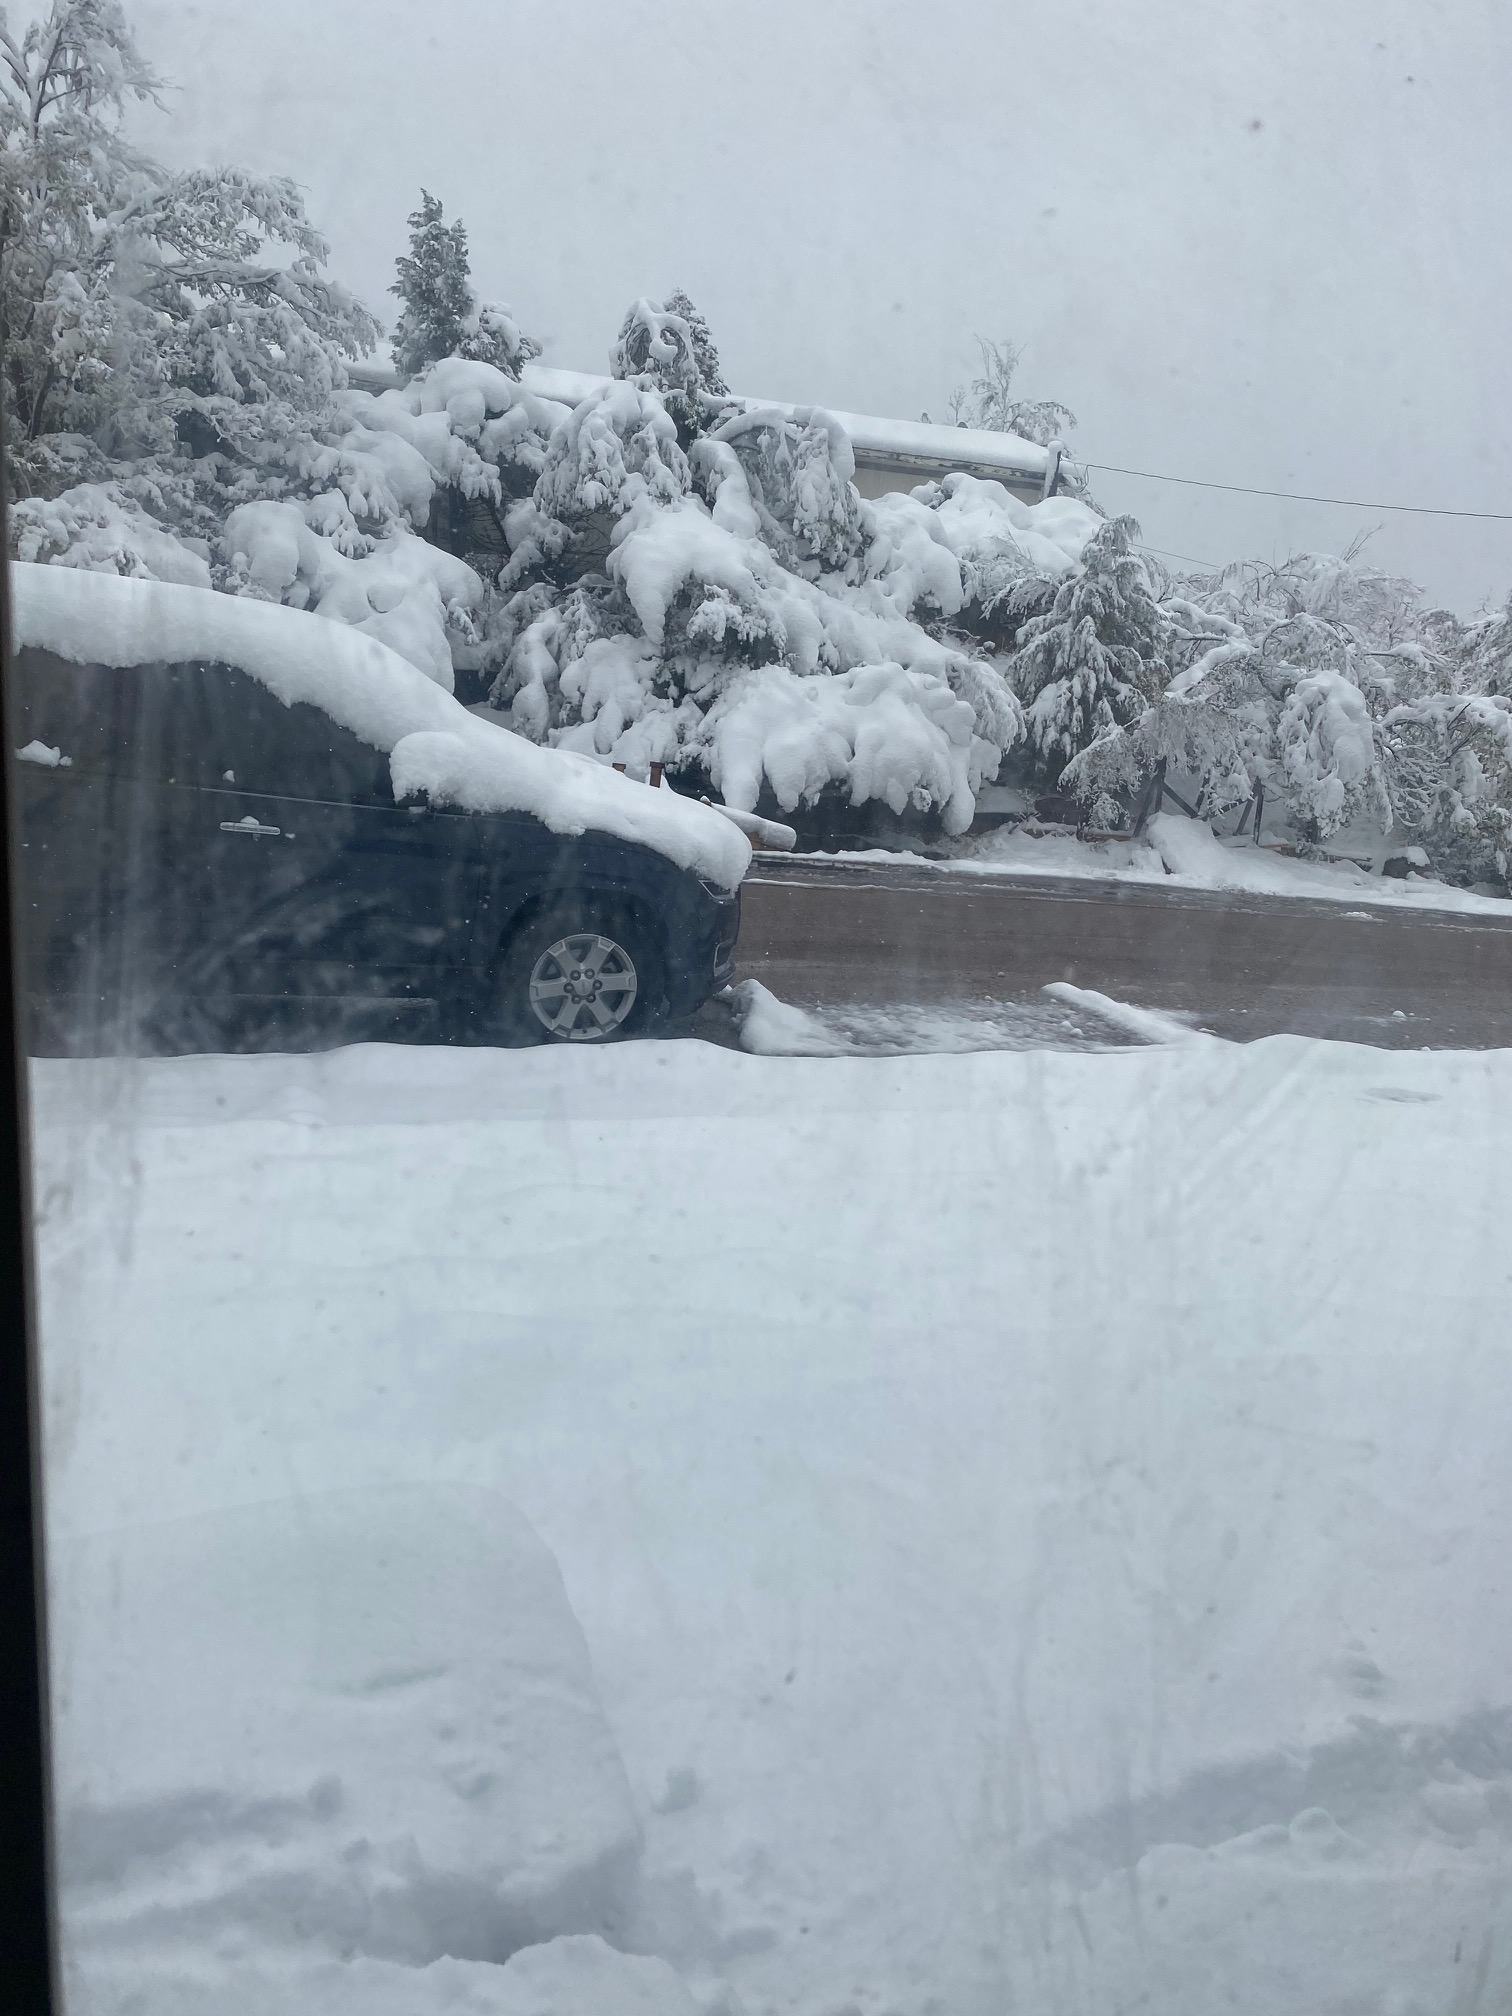 Approximately 6-8 inches cover drooping trees, a house, and an SUV